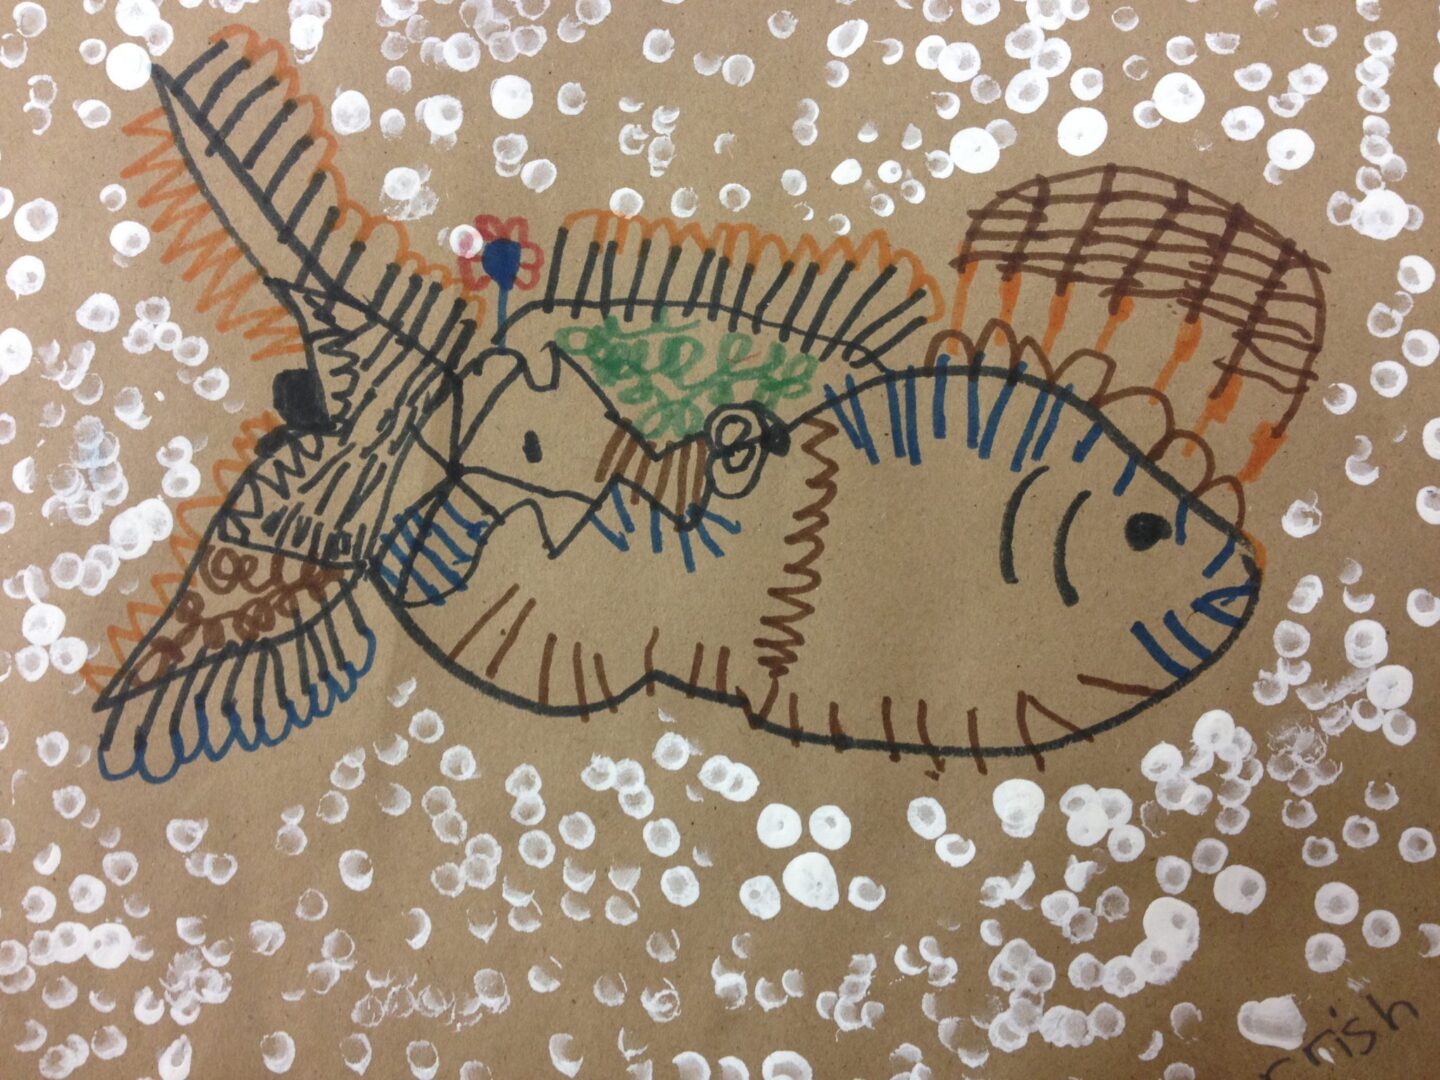 A drawing of a fish on a brown paper.